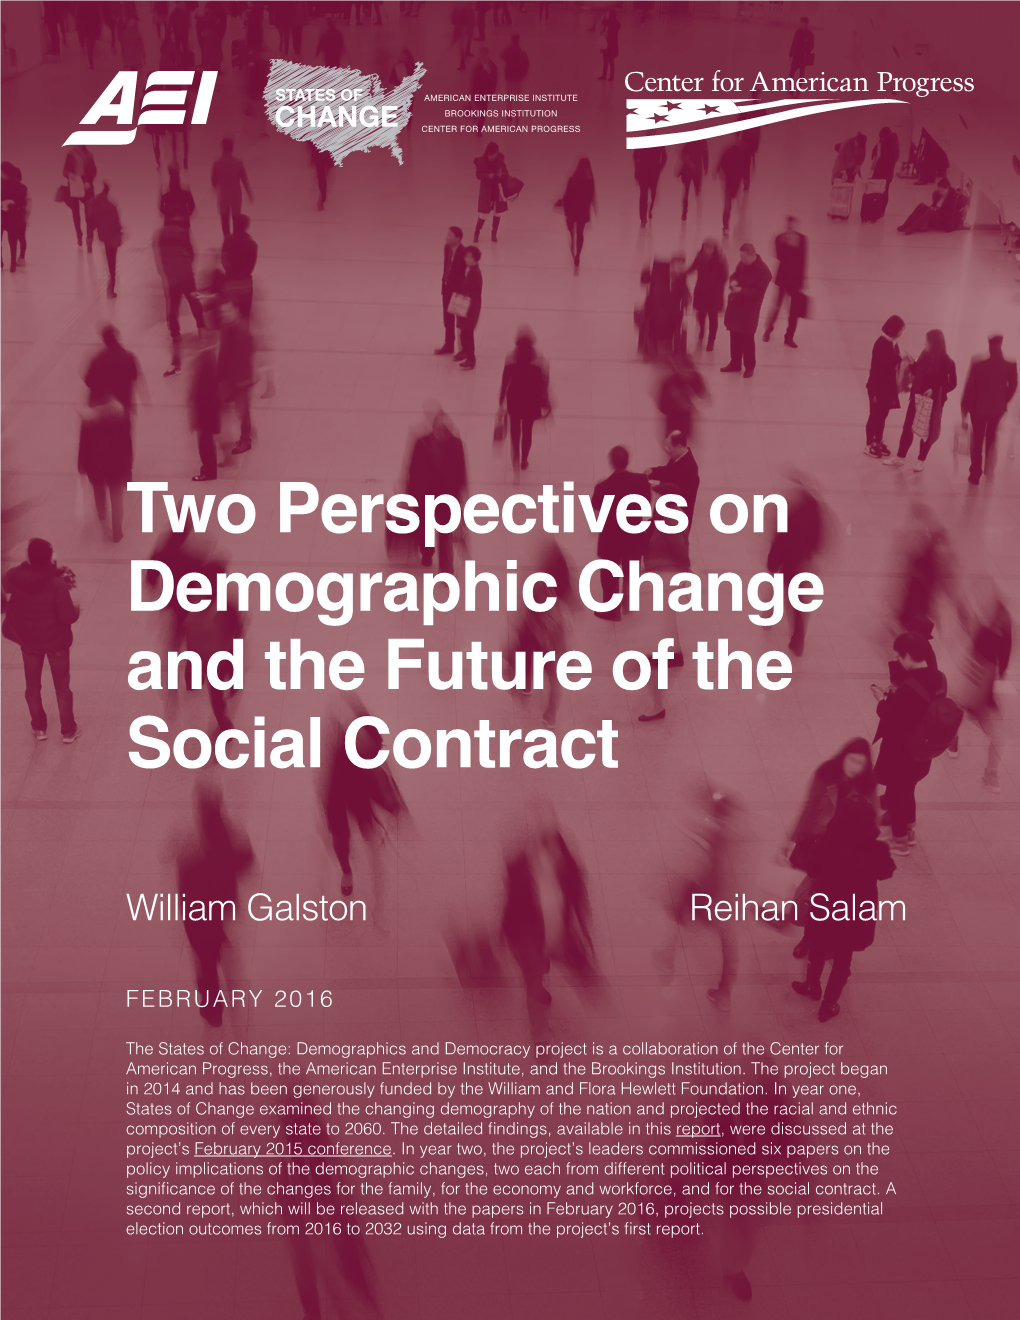 Two Perspectives on Demographic Change and the Future of the Social Contract